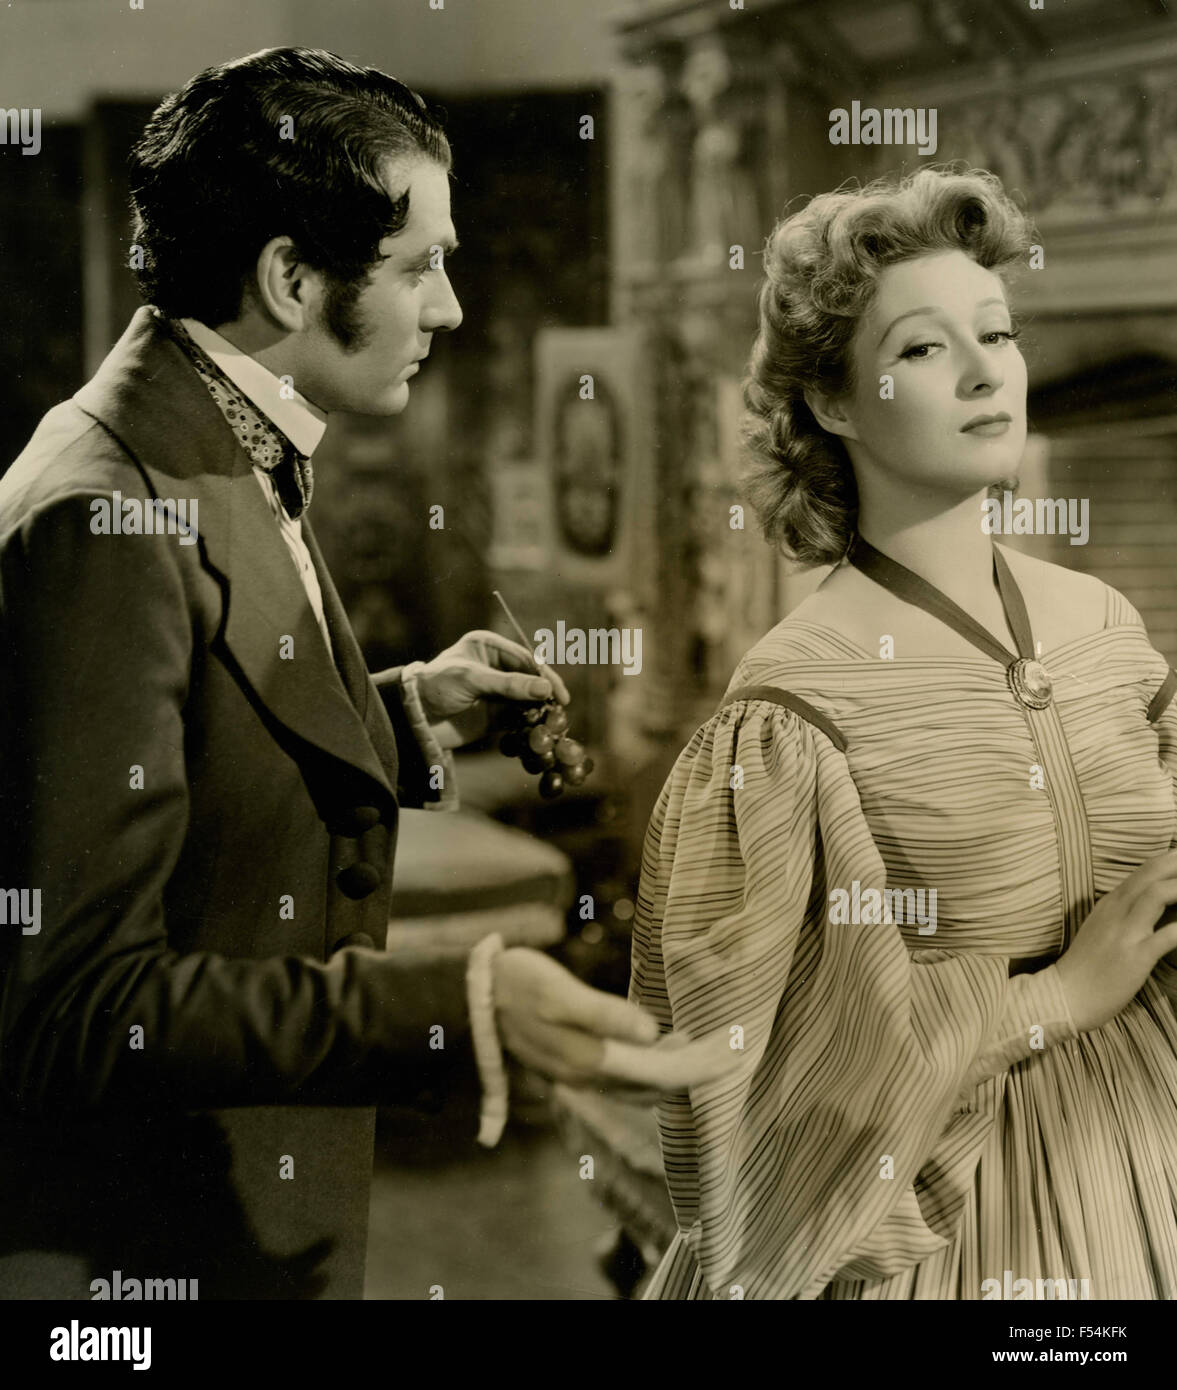 The actors Laurence Olivier and Greer Garson in a scene from the movie 'Pride and Prejudice' Stock Photo